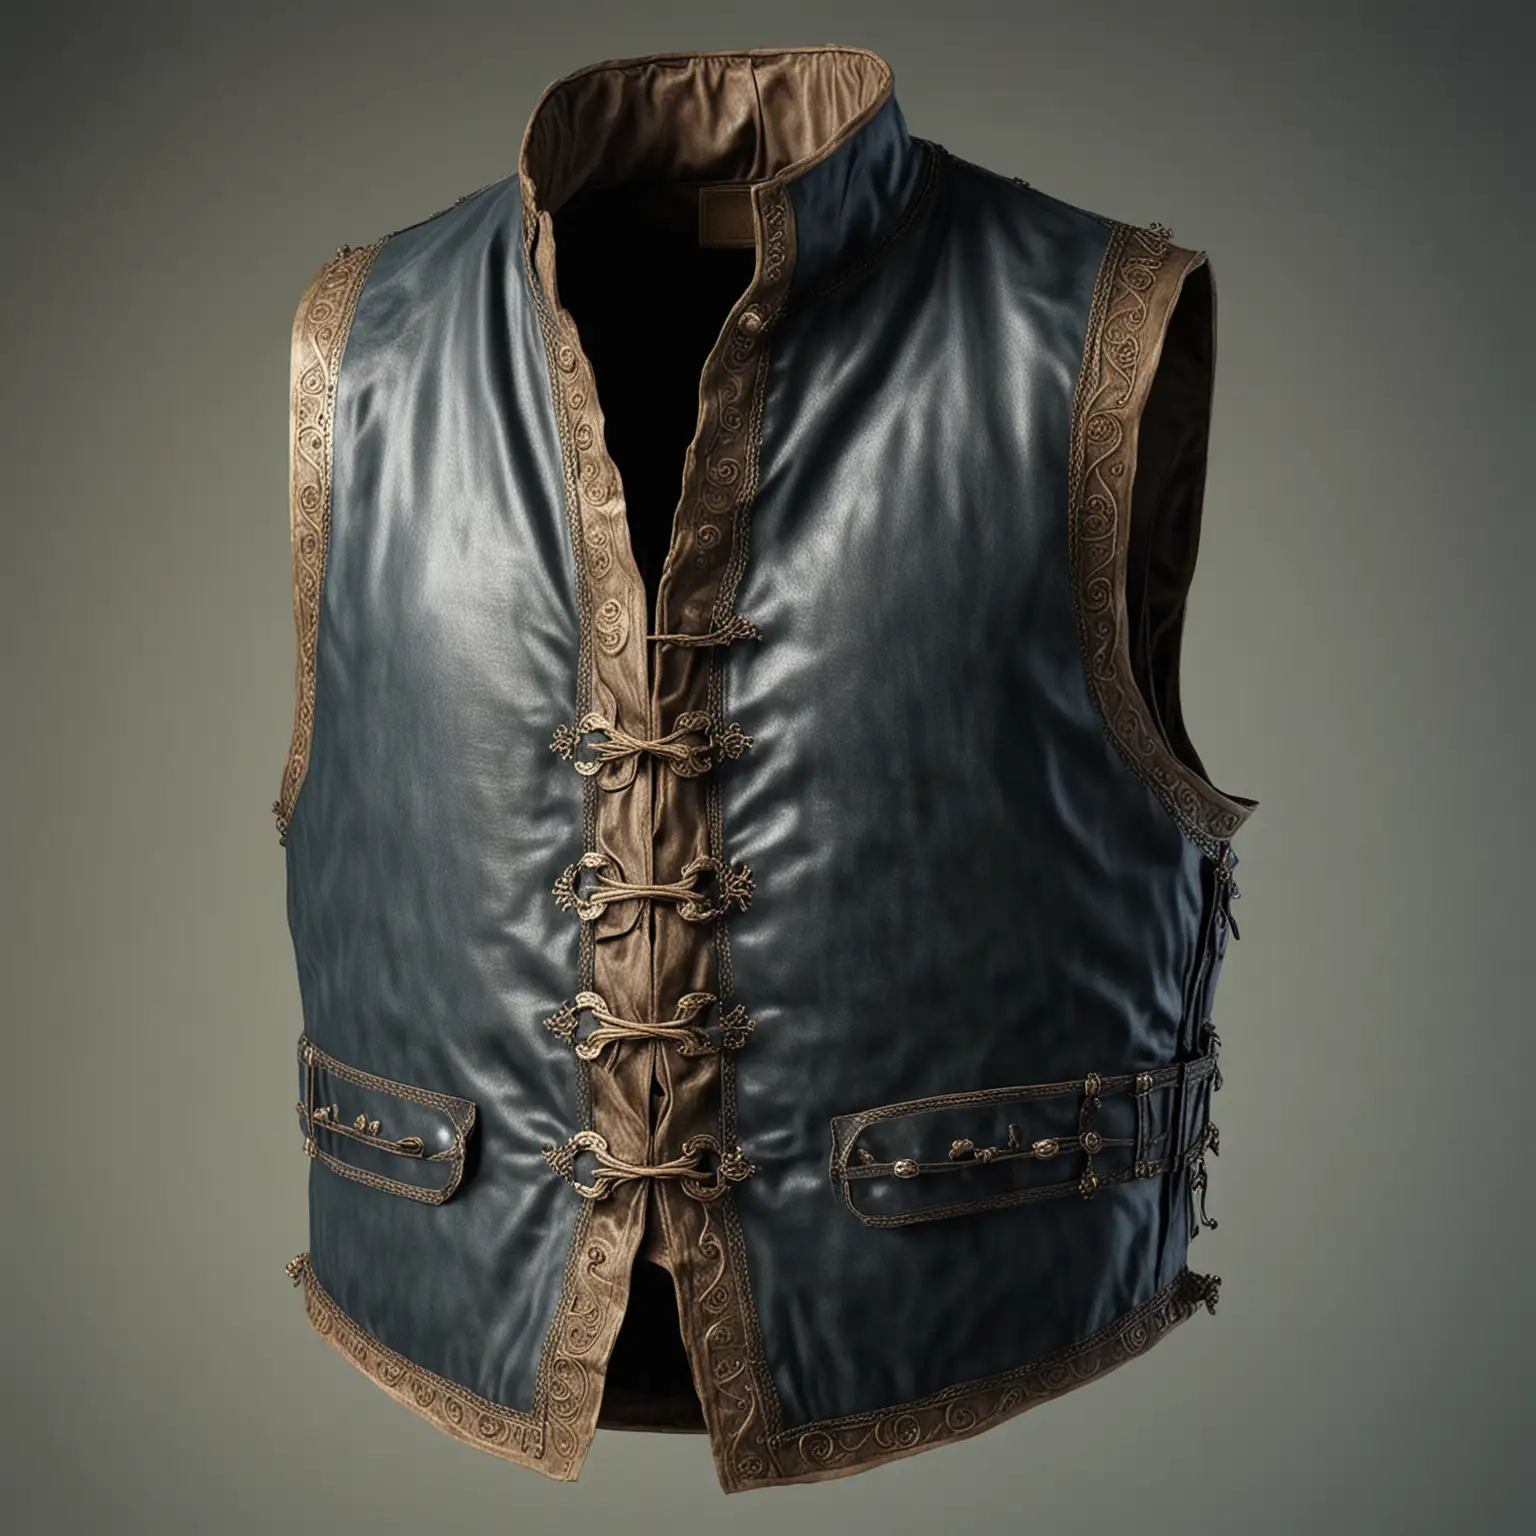 Floating 15th Century Medieval Vest in Realistic Style